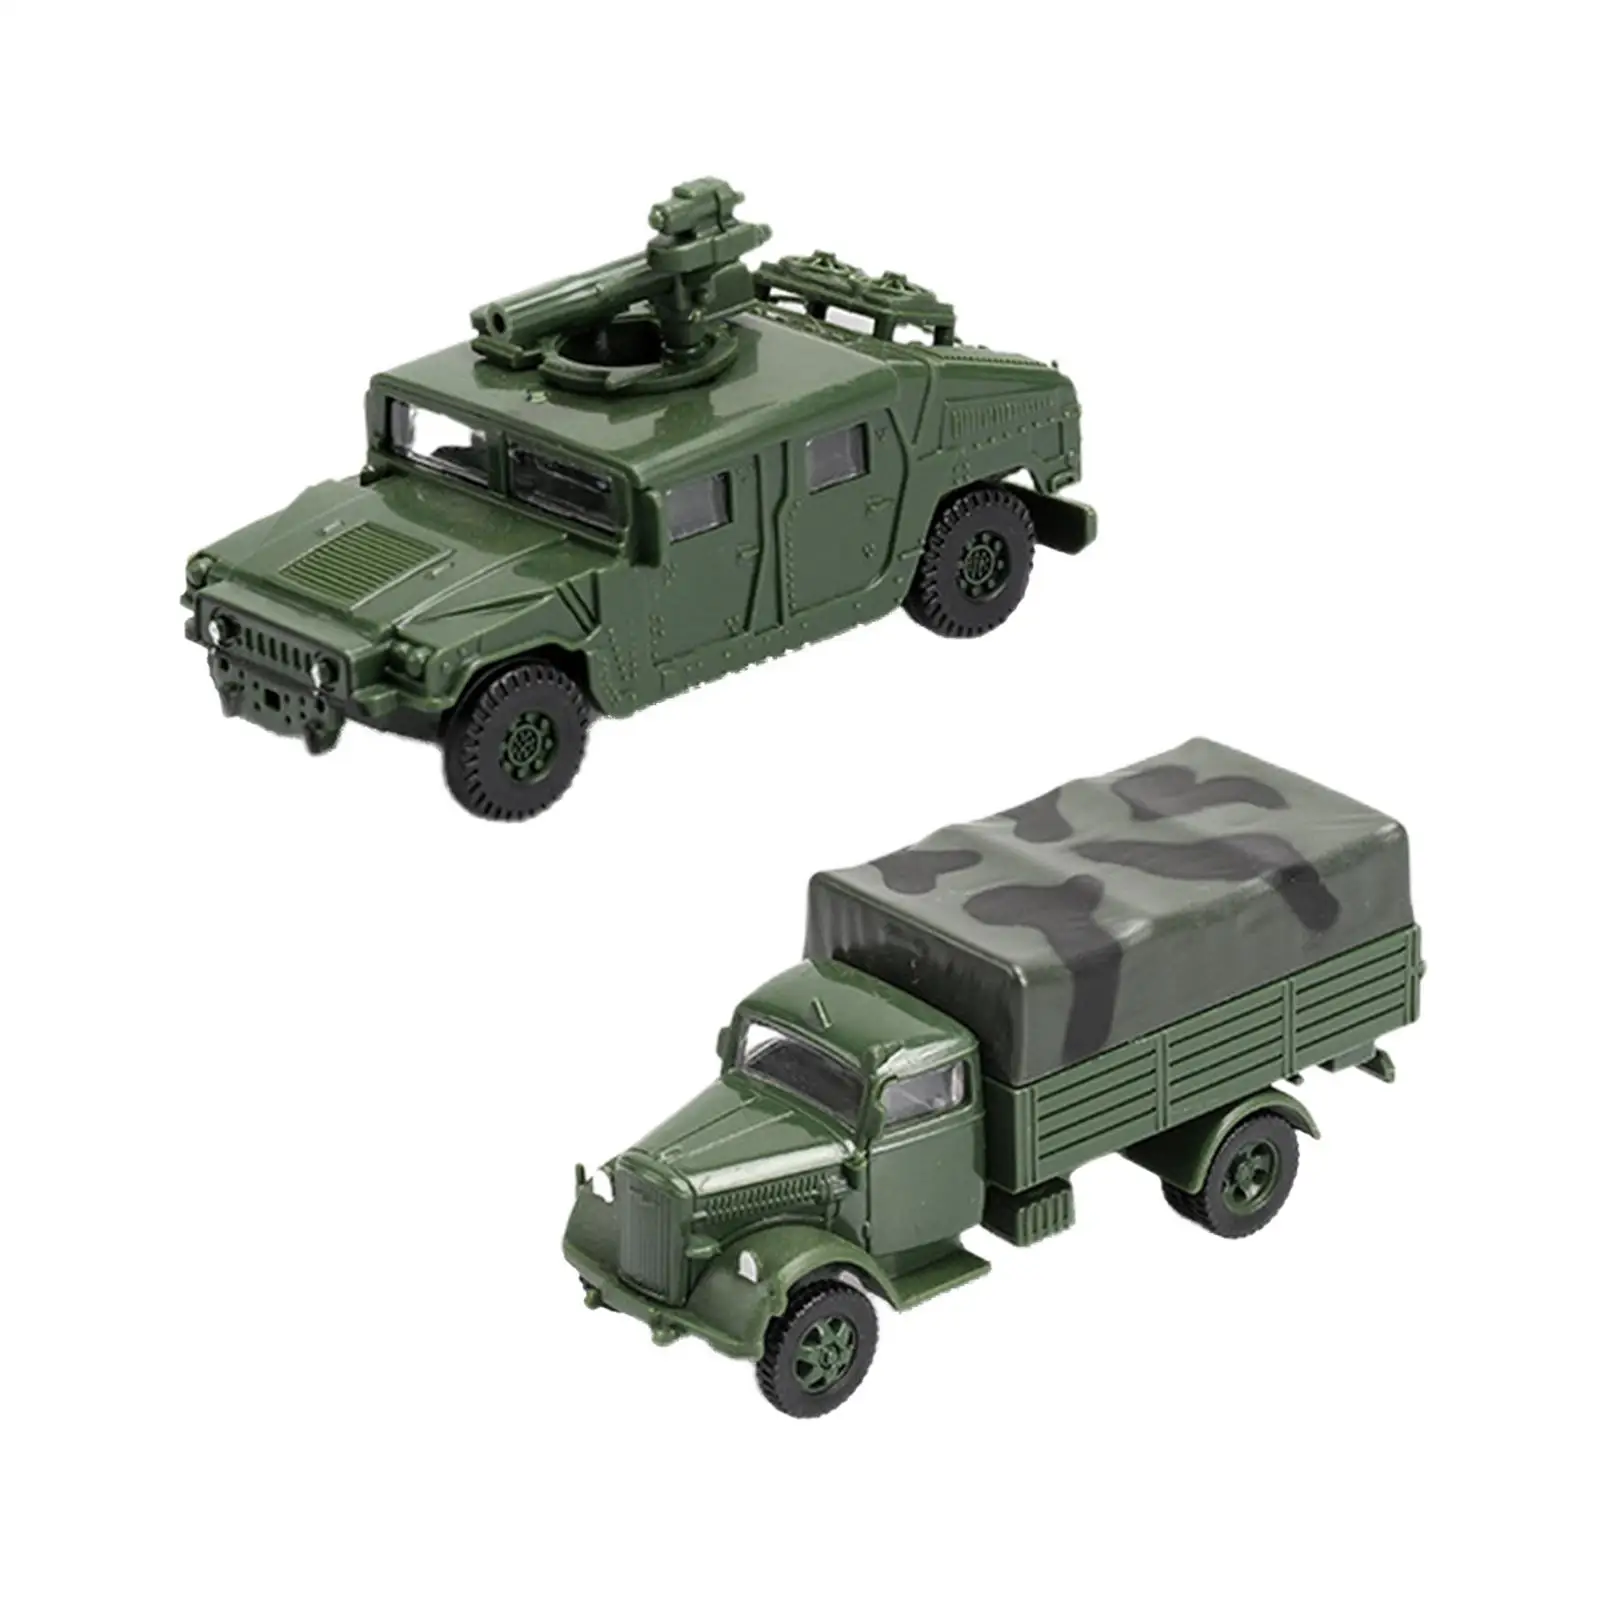 2 Pieces Miniatures 1:72 Assemble American Humvee Kits Hobby Building Puzzle Ornaments for Christmas Present Desktop Kids Gifts